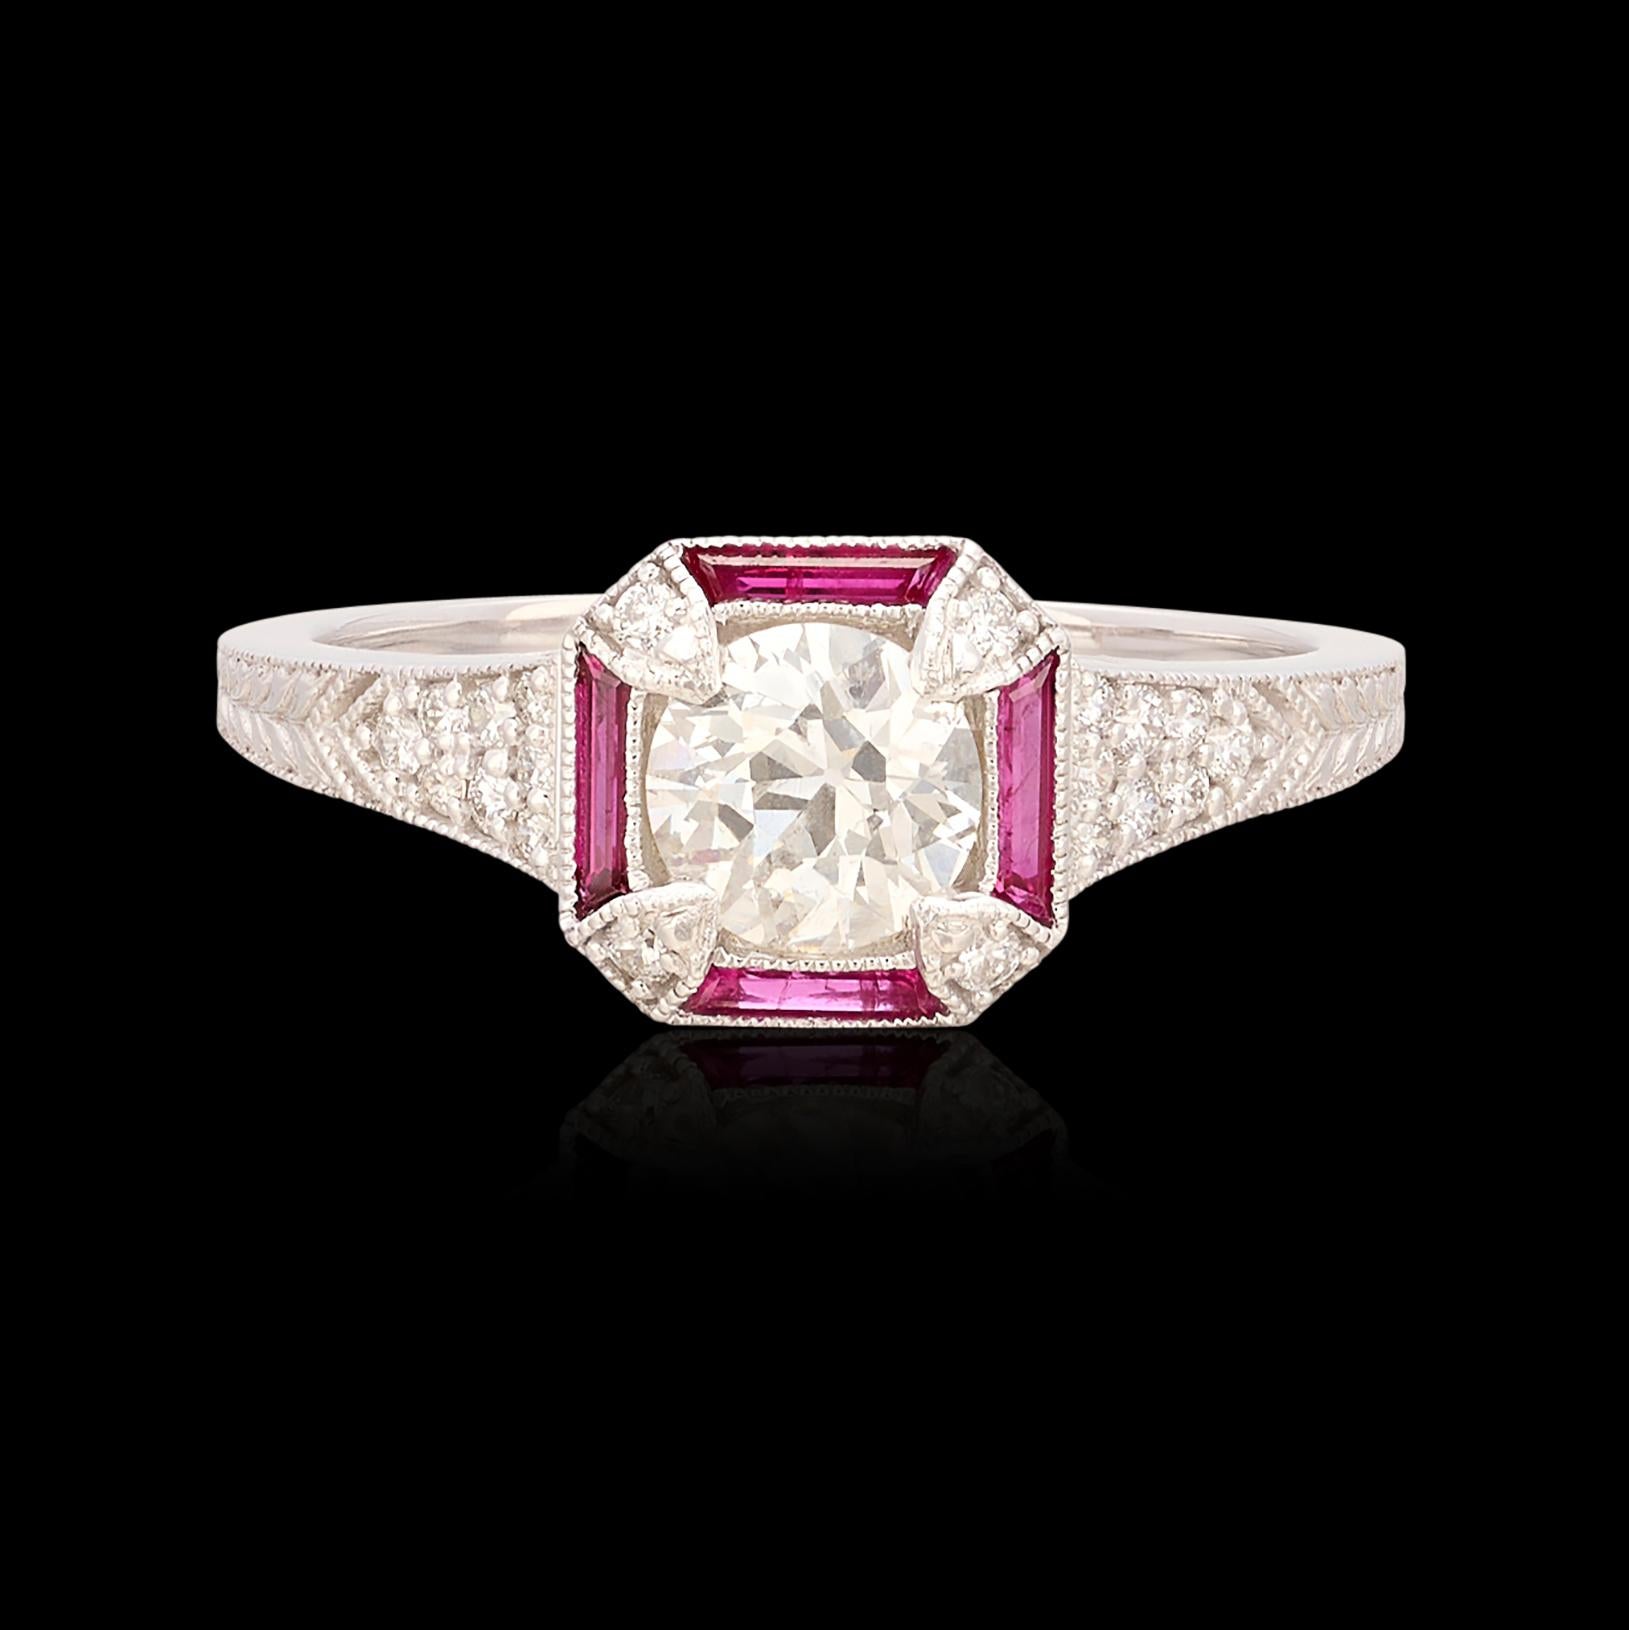 For the Art Deco lover, this ring will be sure to please! Created in 14k white gold, it centers an old European-cut diamond weighing 0.68 carat, G color and SI2 clarity, set within a square frame of long baguette-cut rubies weighing 0.24 carat, with